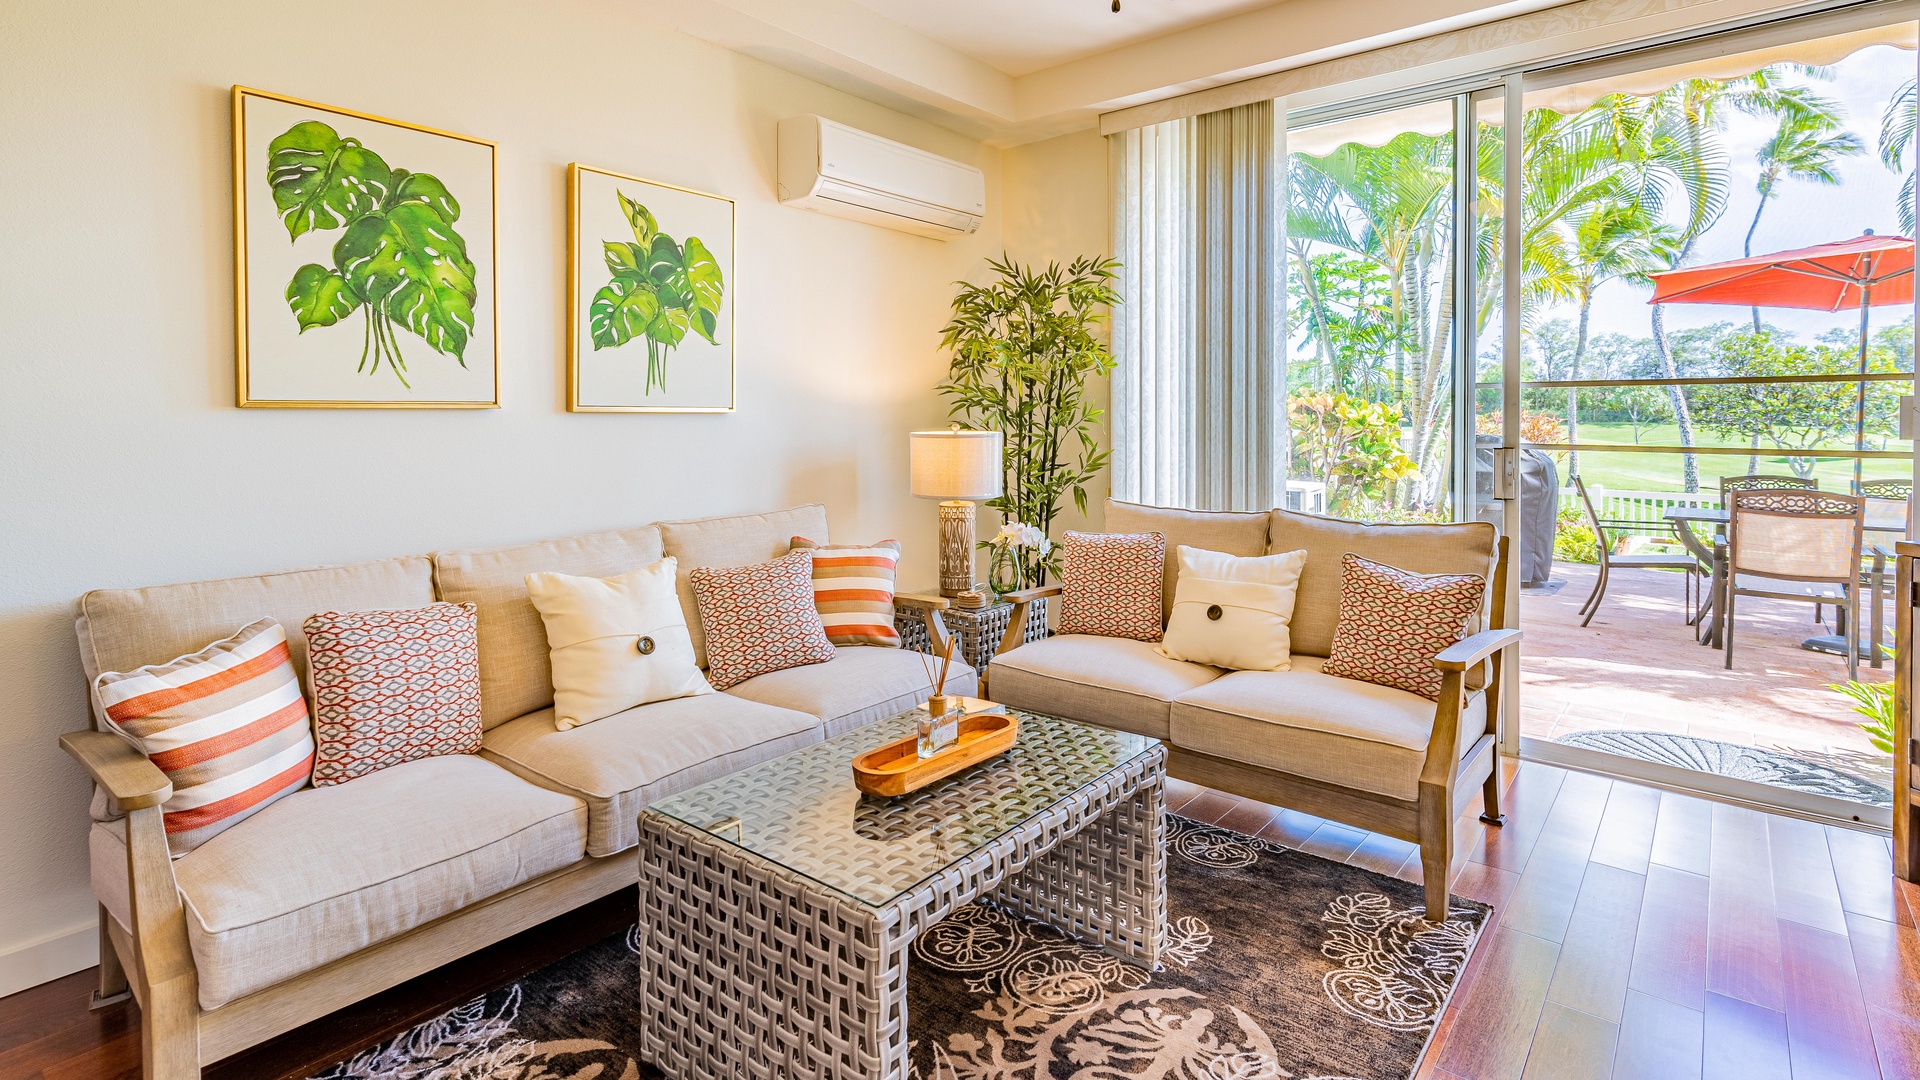 Kapolei Vacation Rentals, Fairways at Ko Olina 20G - Sink into the plush seating in the living area surrounded by natural wood tones for your next movie night.